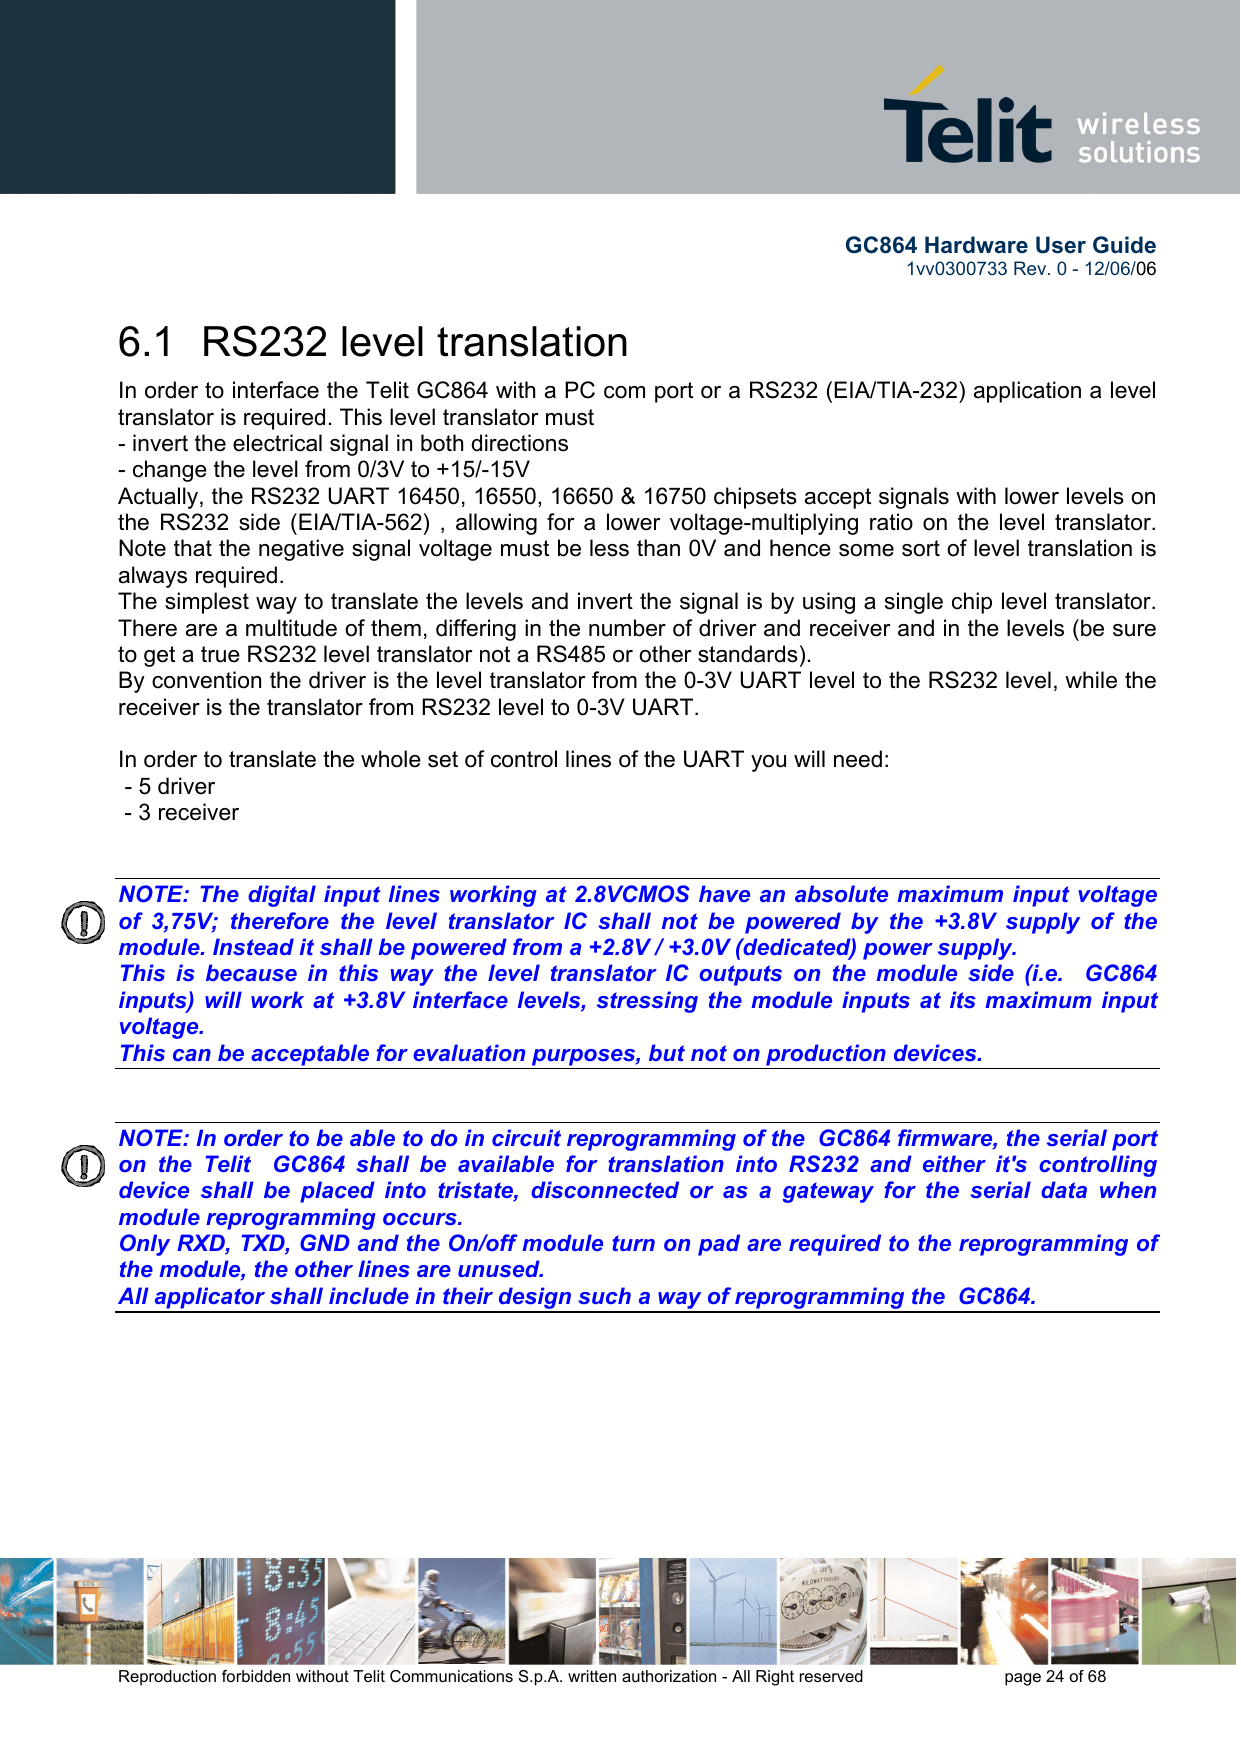        GC864 Hardware User Guide  1vv0300733 Rev. 0 - 12/06/06  Reproduction forbidden without Telit Communications S.p.A. written authorization - All Right reserved    page 24 of 68  6.1  RS232 level translation In order to interface the Telit GC864 with a PC com port or a RS232 (EIA/TIA-232) application a level translator is required. This level translator must - invert the electrical signal in both directions - change the level from 0/3V to +15/-15V  Actually, the RS232 UART 16450, 16550, 16650 &amp; 16750 chipsets accept signals with lower levels on the RS232 side (EIA/TIA-562) , allowing for a lower voltage-multiplying ratio on the level translator. Note that the negative signal voltage must be less than 0V and hence some sort of level translation is always required.  The simplest way to translate the levels and invert the signal is by using a single chip level translator. There are a multitude of them, differing in the number of driver and receiver and in the levels (be sure to get a true RS232 level translator not a RS485 or other standards). By convention the driver is the level translator from the 0-3V UART level to the RS232 level, while the receiver is the translator from RS232 level to 0-3V UART.  In order to translate the whole set of control lines of the UART you will need:  - 5 driver - 3 receiver   NOTE: The digital input lines working at 2.8VCMOS have an absolute maximum input voltage of 3,75V; therefore the level translator IC shall not be powered by the +3.8V supply of the module. Instead it shall be powered from a +2.8V / +3.0V (dedicated) power supply. This is because in this way the level translator IC outputs on the module side (i.e.  GC864 inputs) will work at +3.8V interface levels, stressing the module inputs at its maximum input voltage. This can be acceptable for evaluation purposes, but not on production devices.   NOTE: In order to be able to do in circuit reprogramming of the  GC864 firmware, the serial port on the Telit  GC864 shall be available for translation into RS232 and either it&apos;s controlling device shall be placed into tristate, disconnected or as a gateway for the serial data when module reprogramming occurs. Only RXD, TXD, GND and the On/off module turn on pad are required to the reprogramming of the module, the other lines are unused. All applicator shall include in their design such a way of reprogramming the  GC864.    